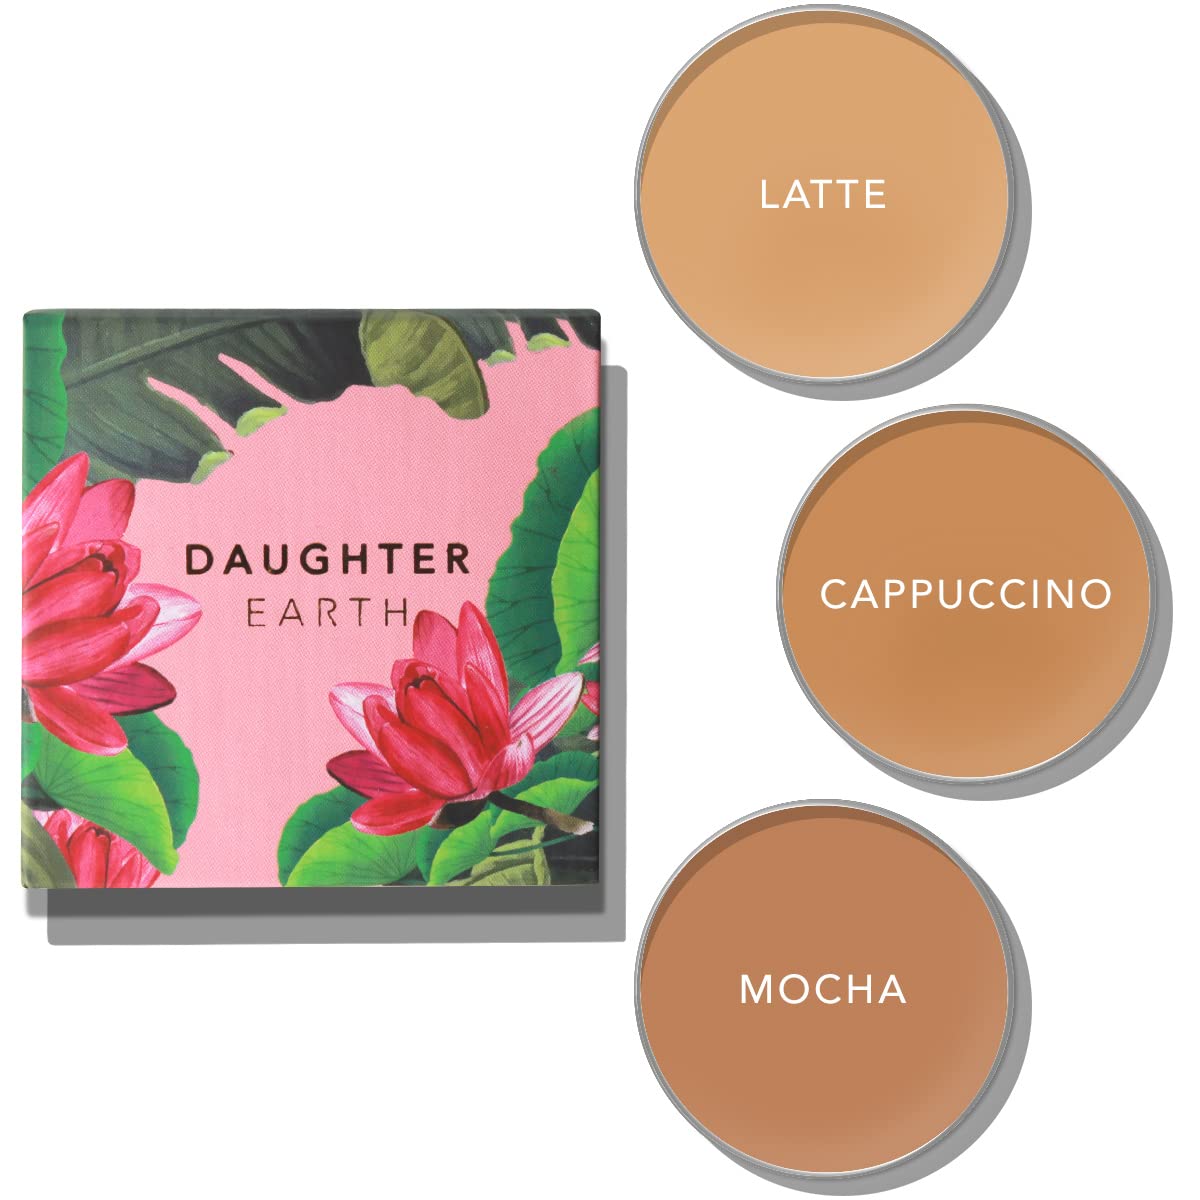 Daughter Earth + face + The Concealer + LATTE + deal